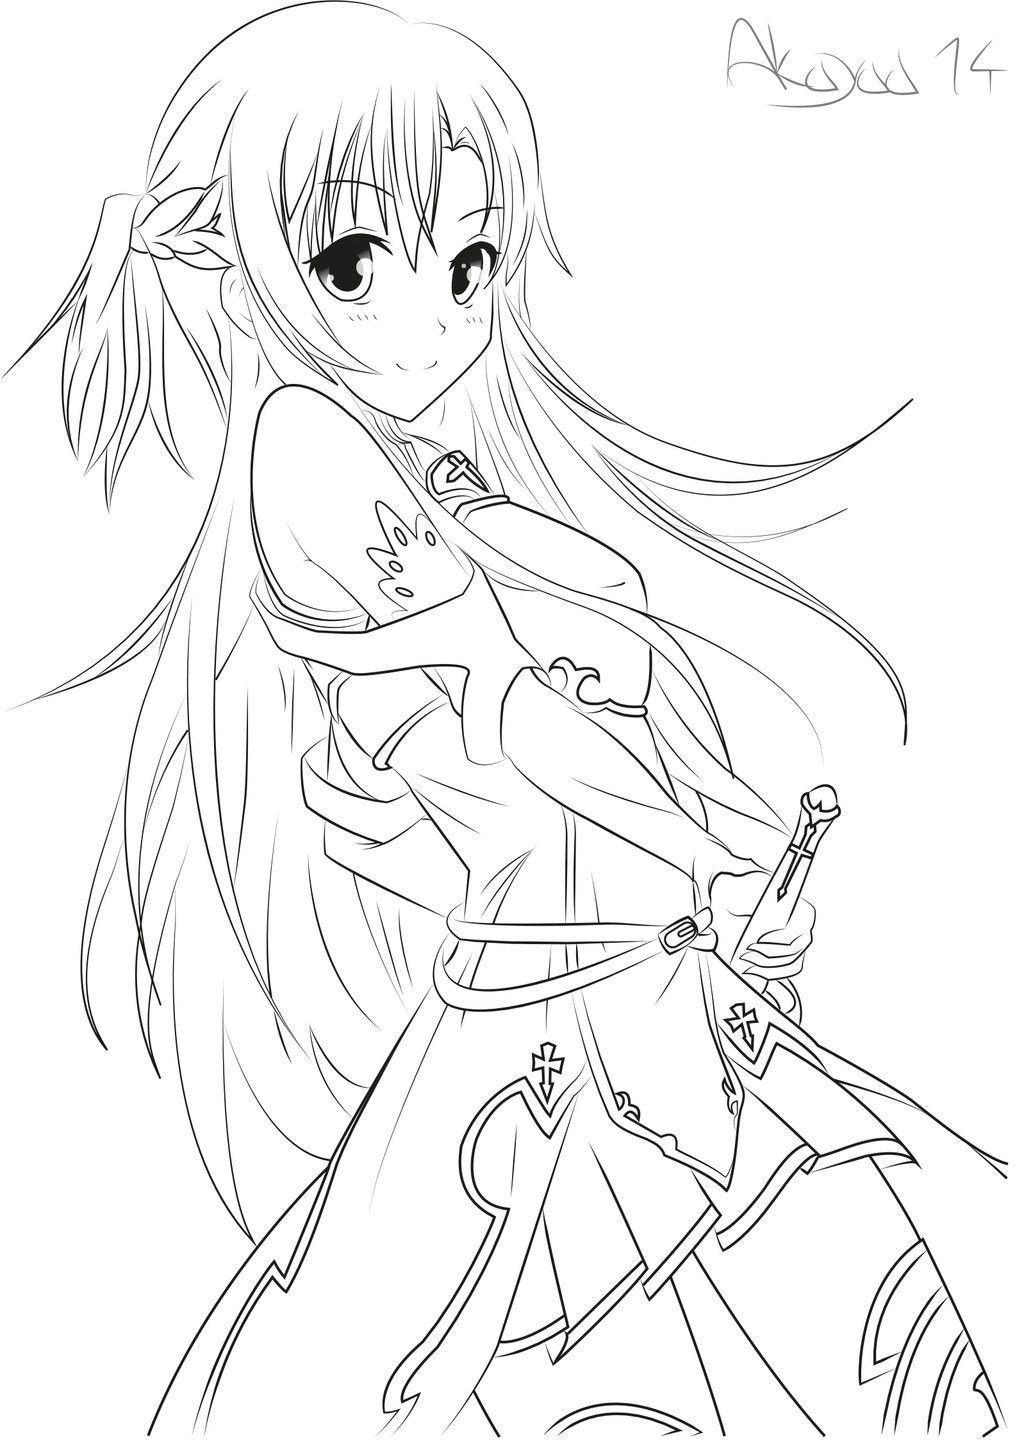 Sword Art Online Coloring Pages
 Asuna Yuuki Sword Art line [LineArt] by Akayaa on